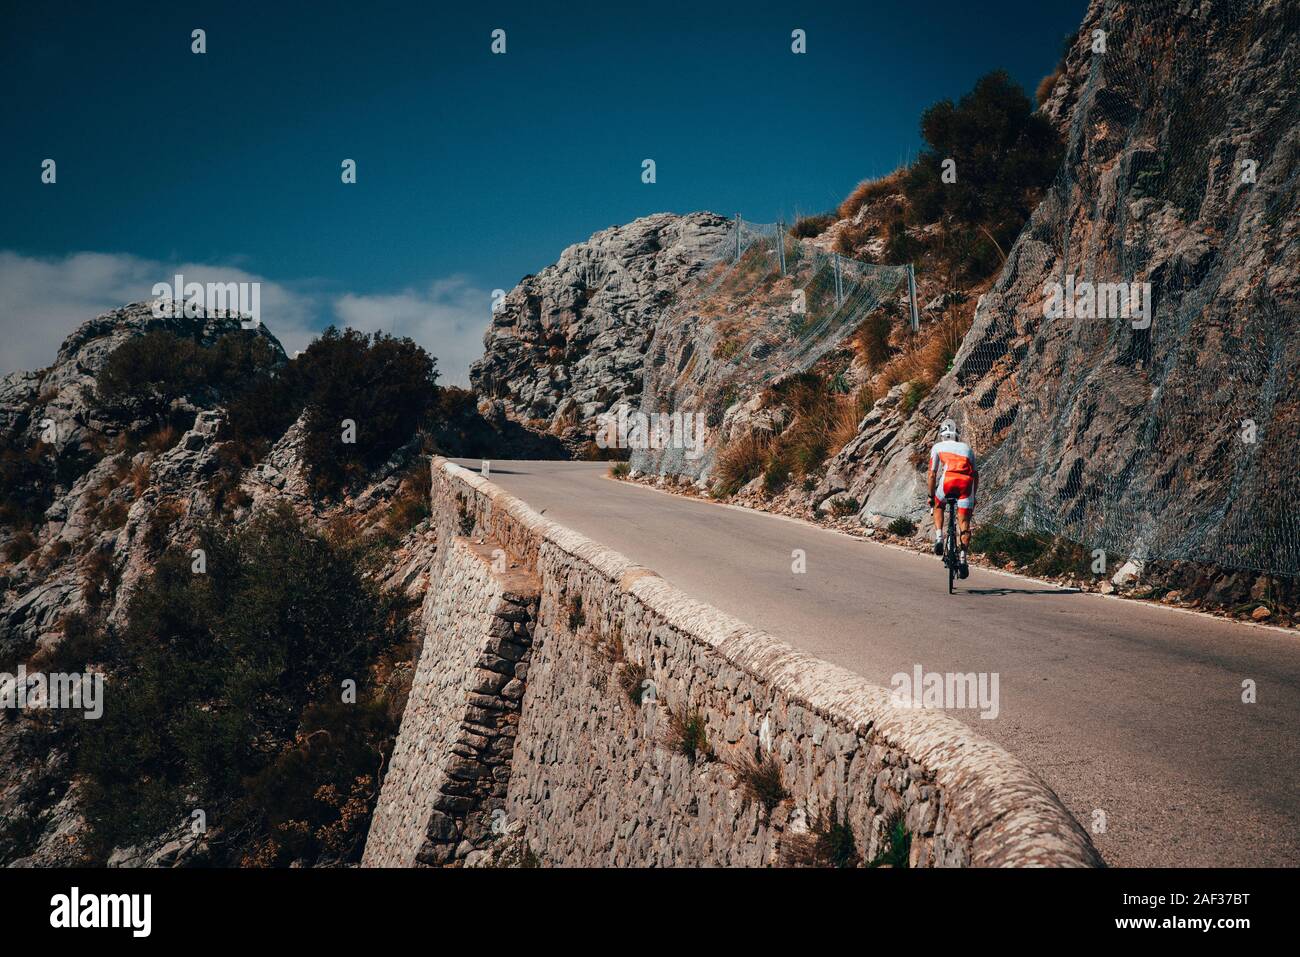 Biker on the road bicycle ride uphill on the famous Sa Calobra climb in Spain. Stock Photo